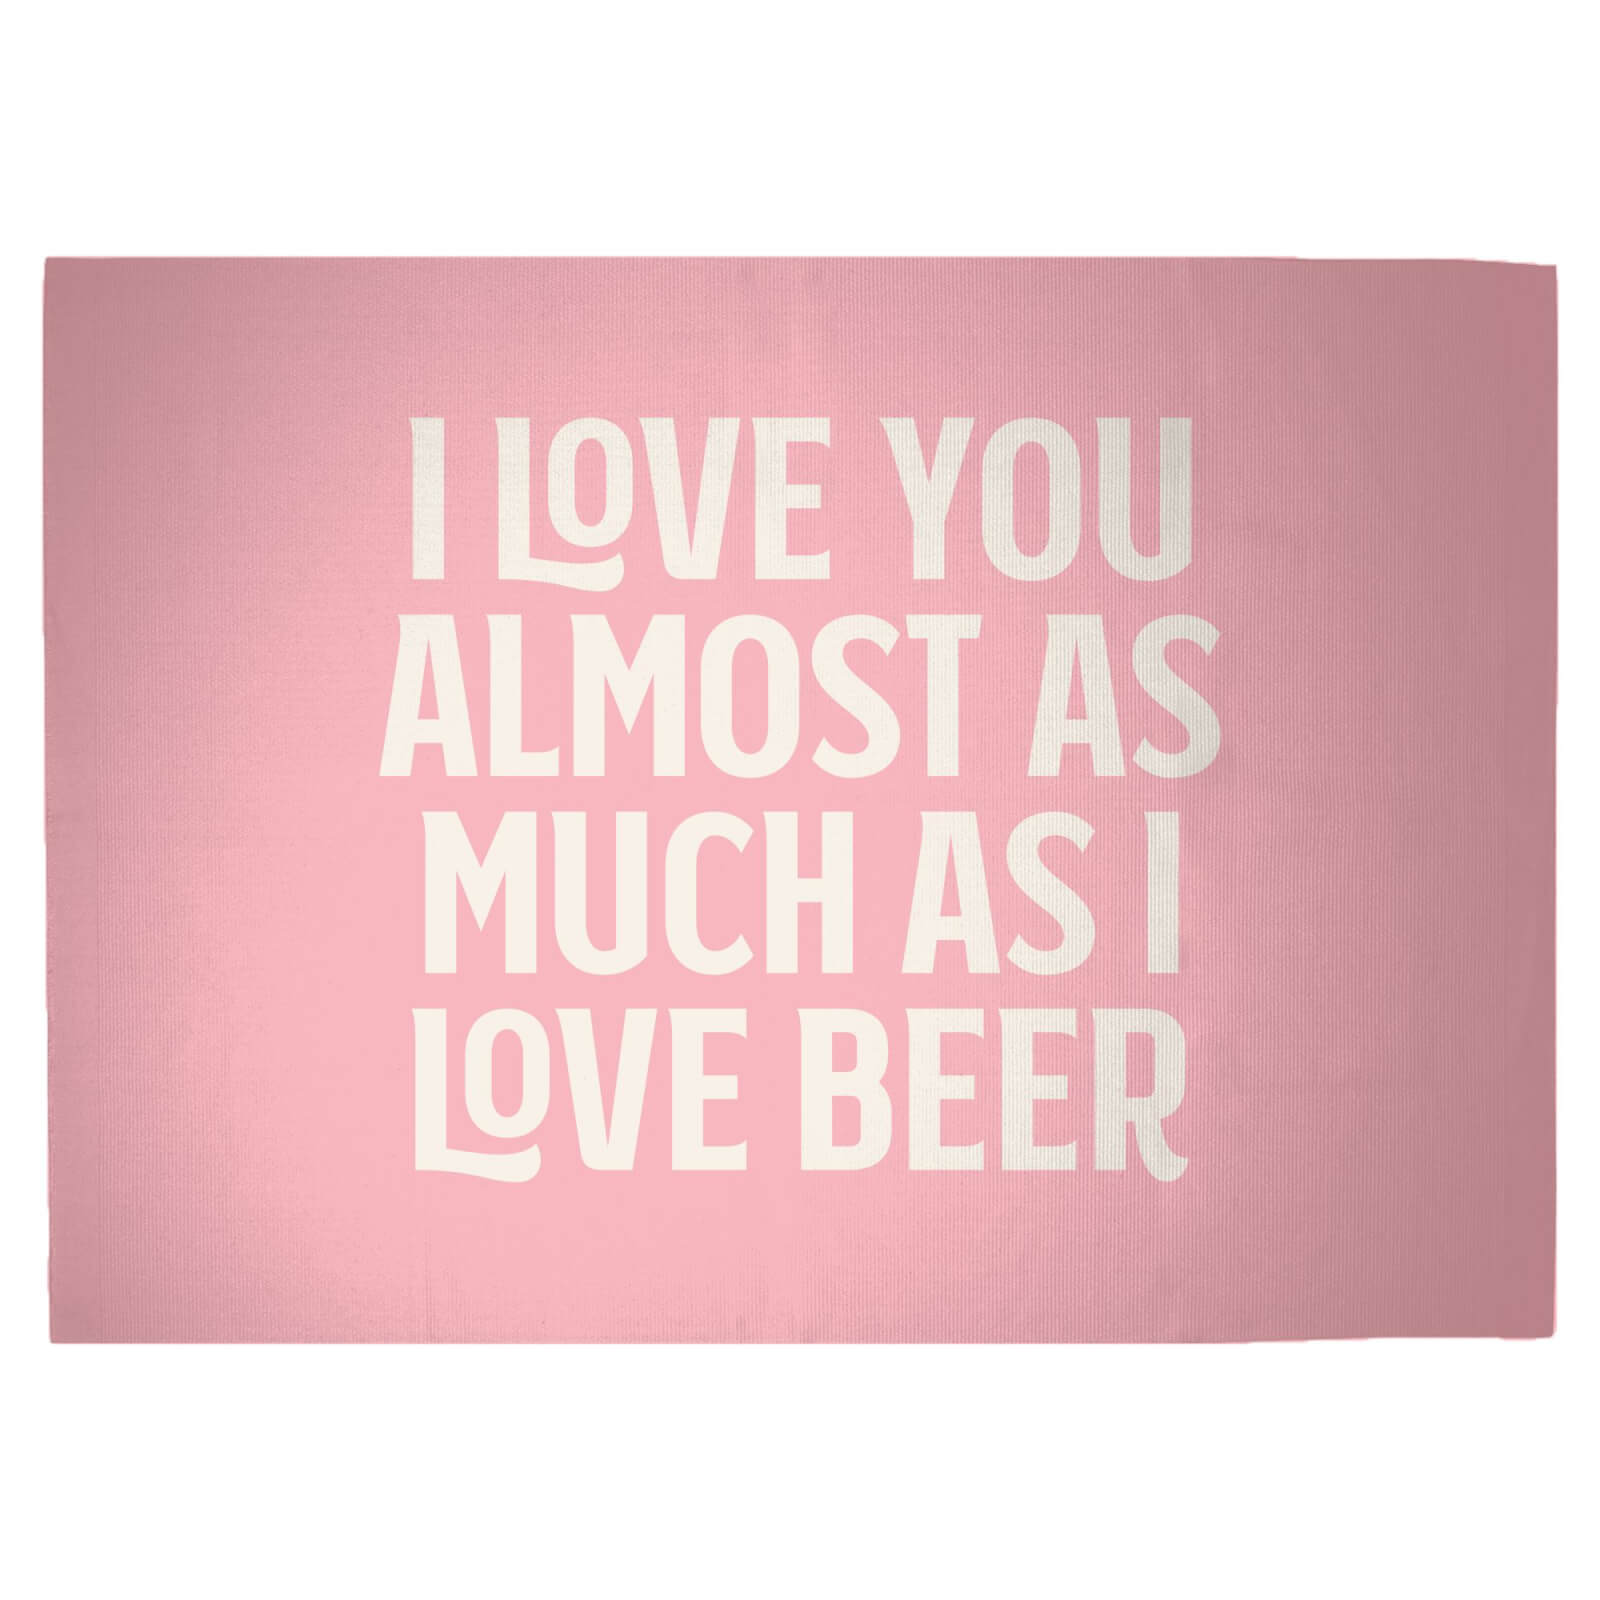 I Love You Almost As Much As I Love Beer Woven Rug - Large